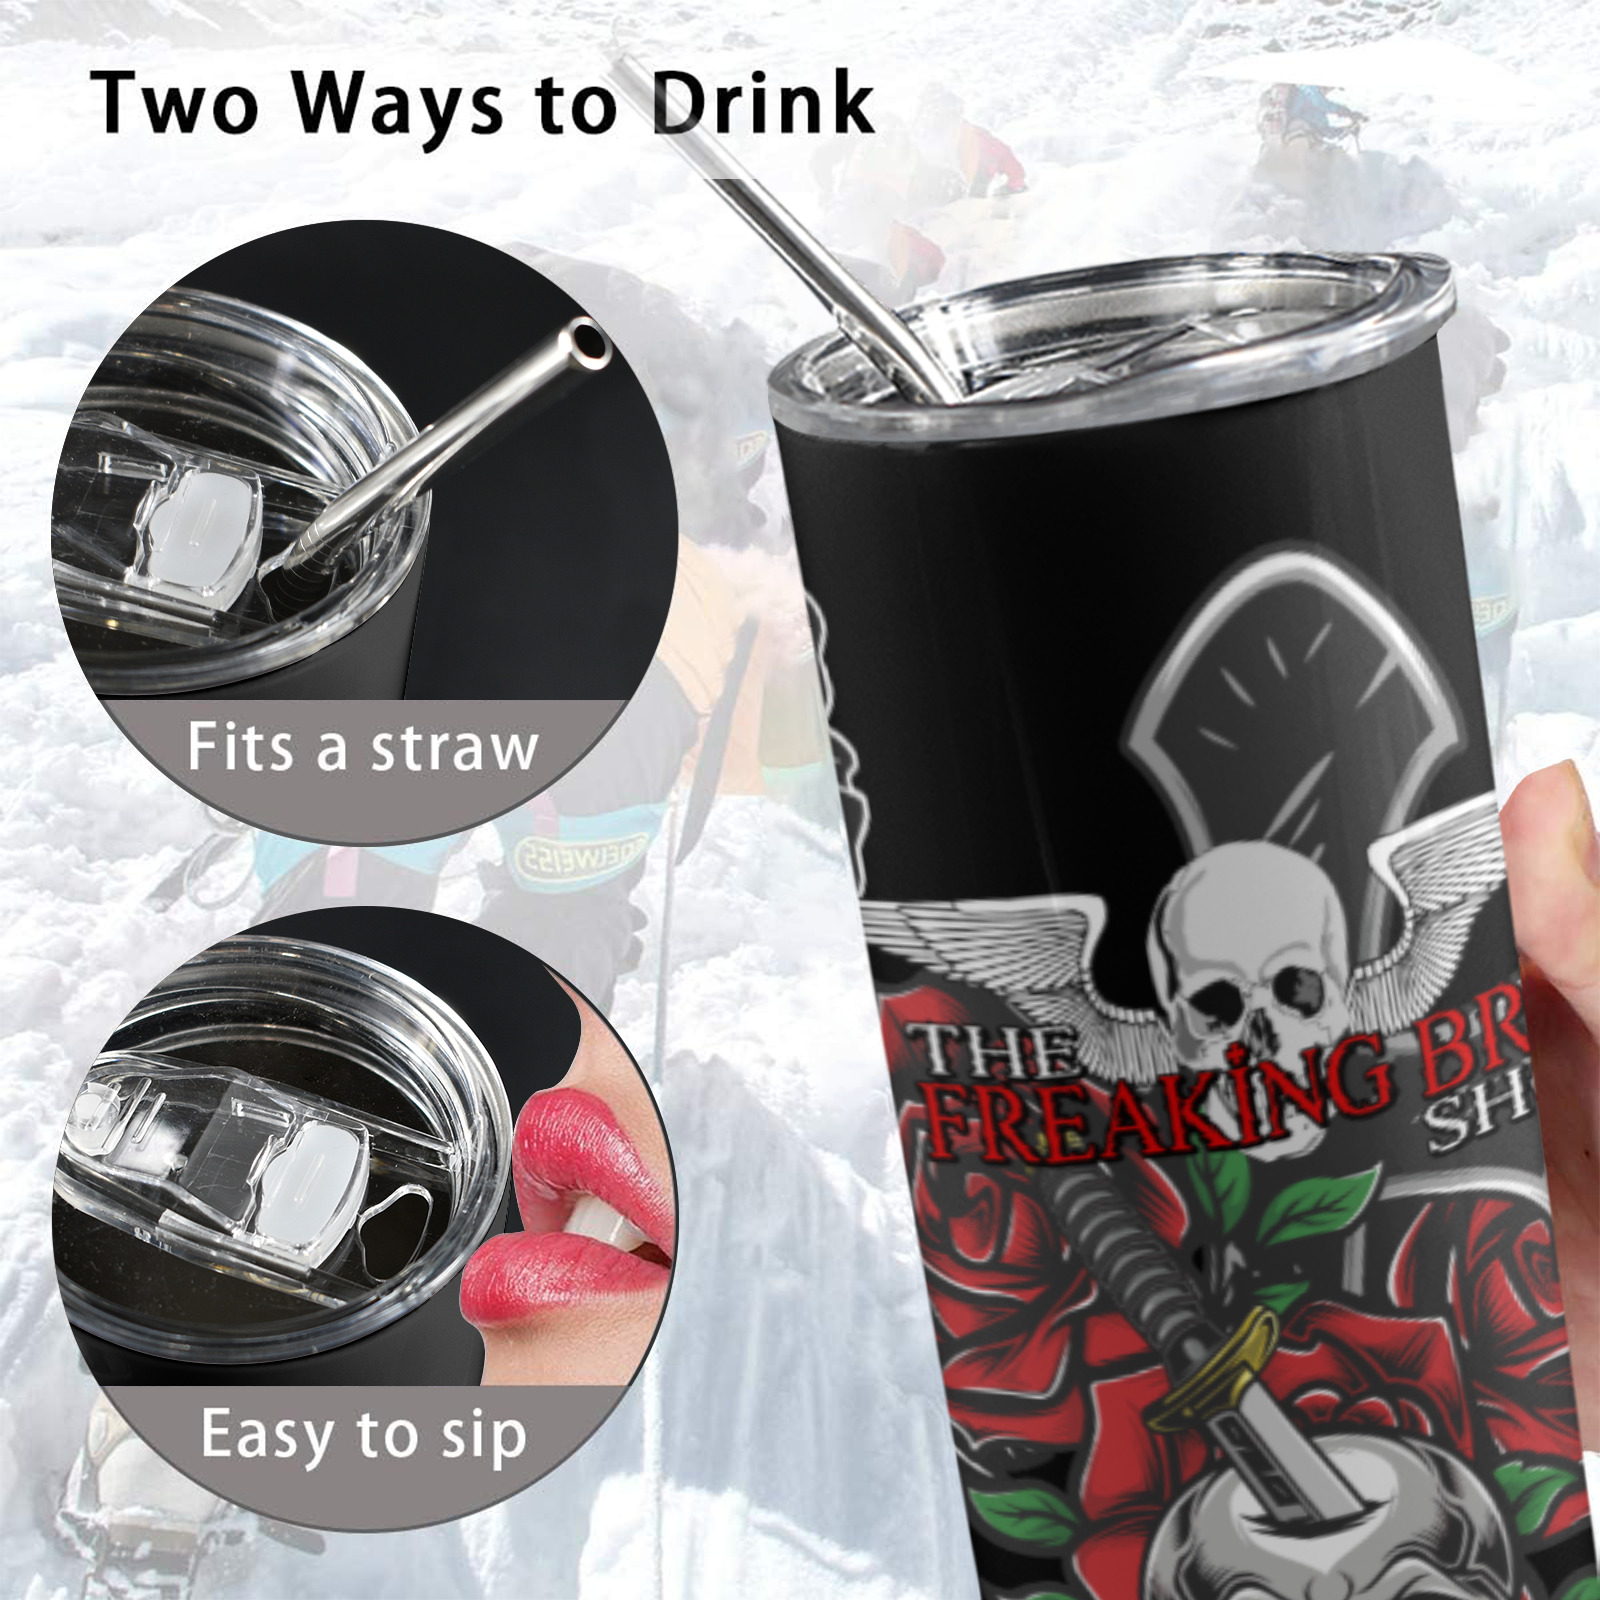 dagger 20oz Tall Skinny Tumbler with Lid and Straw